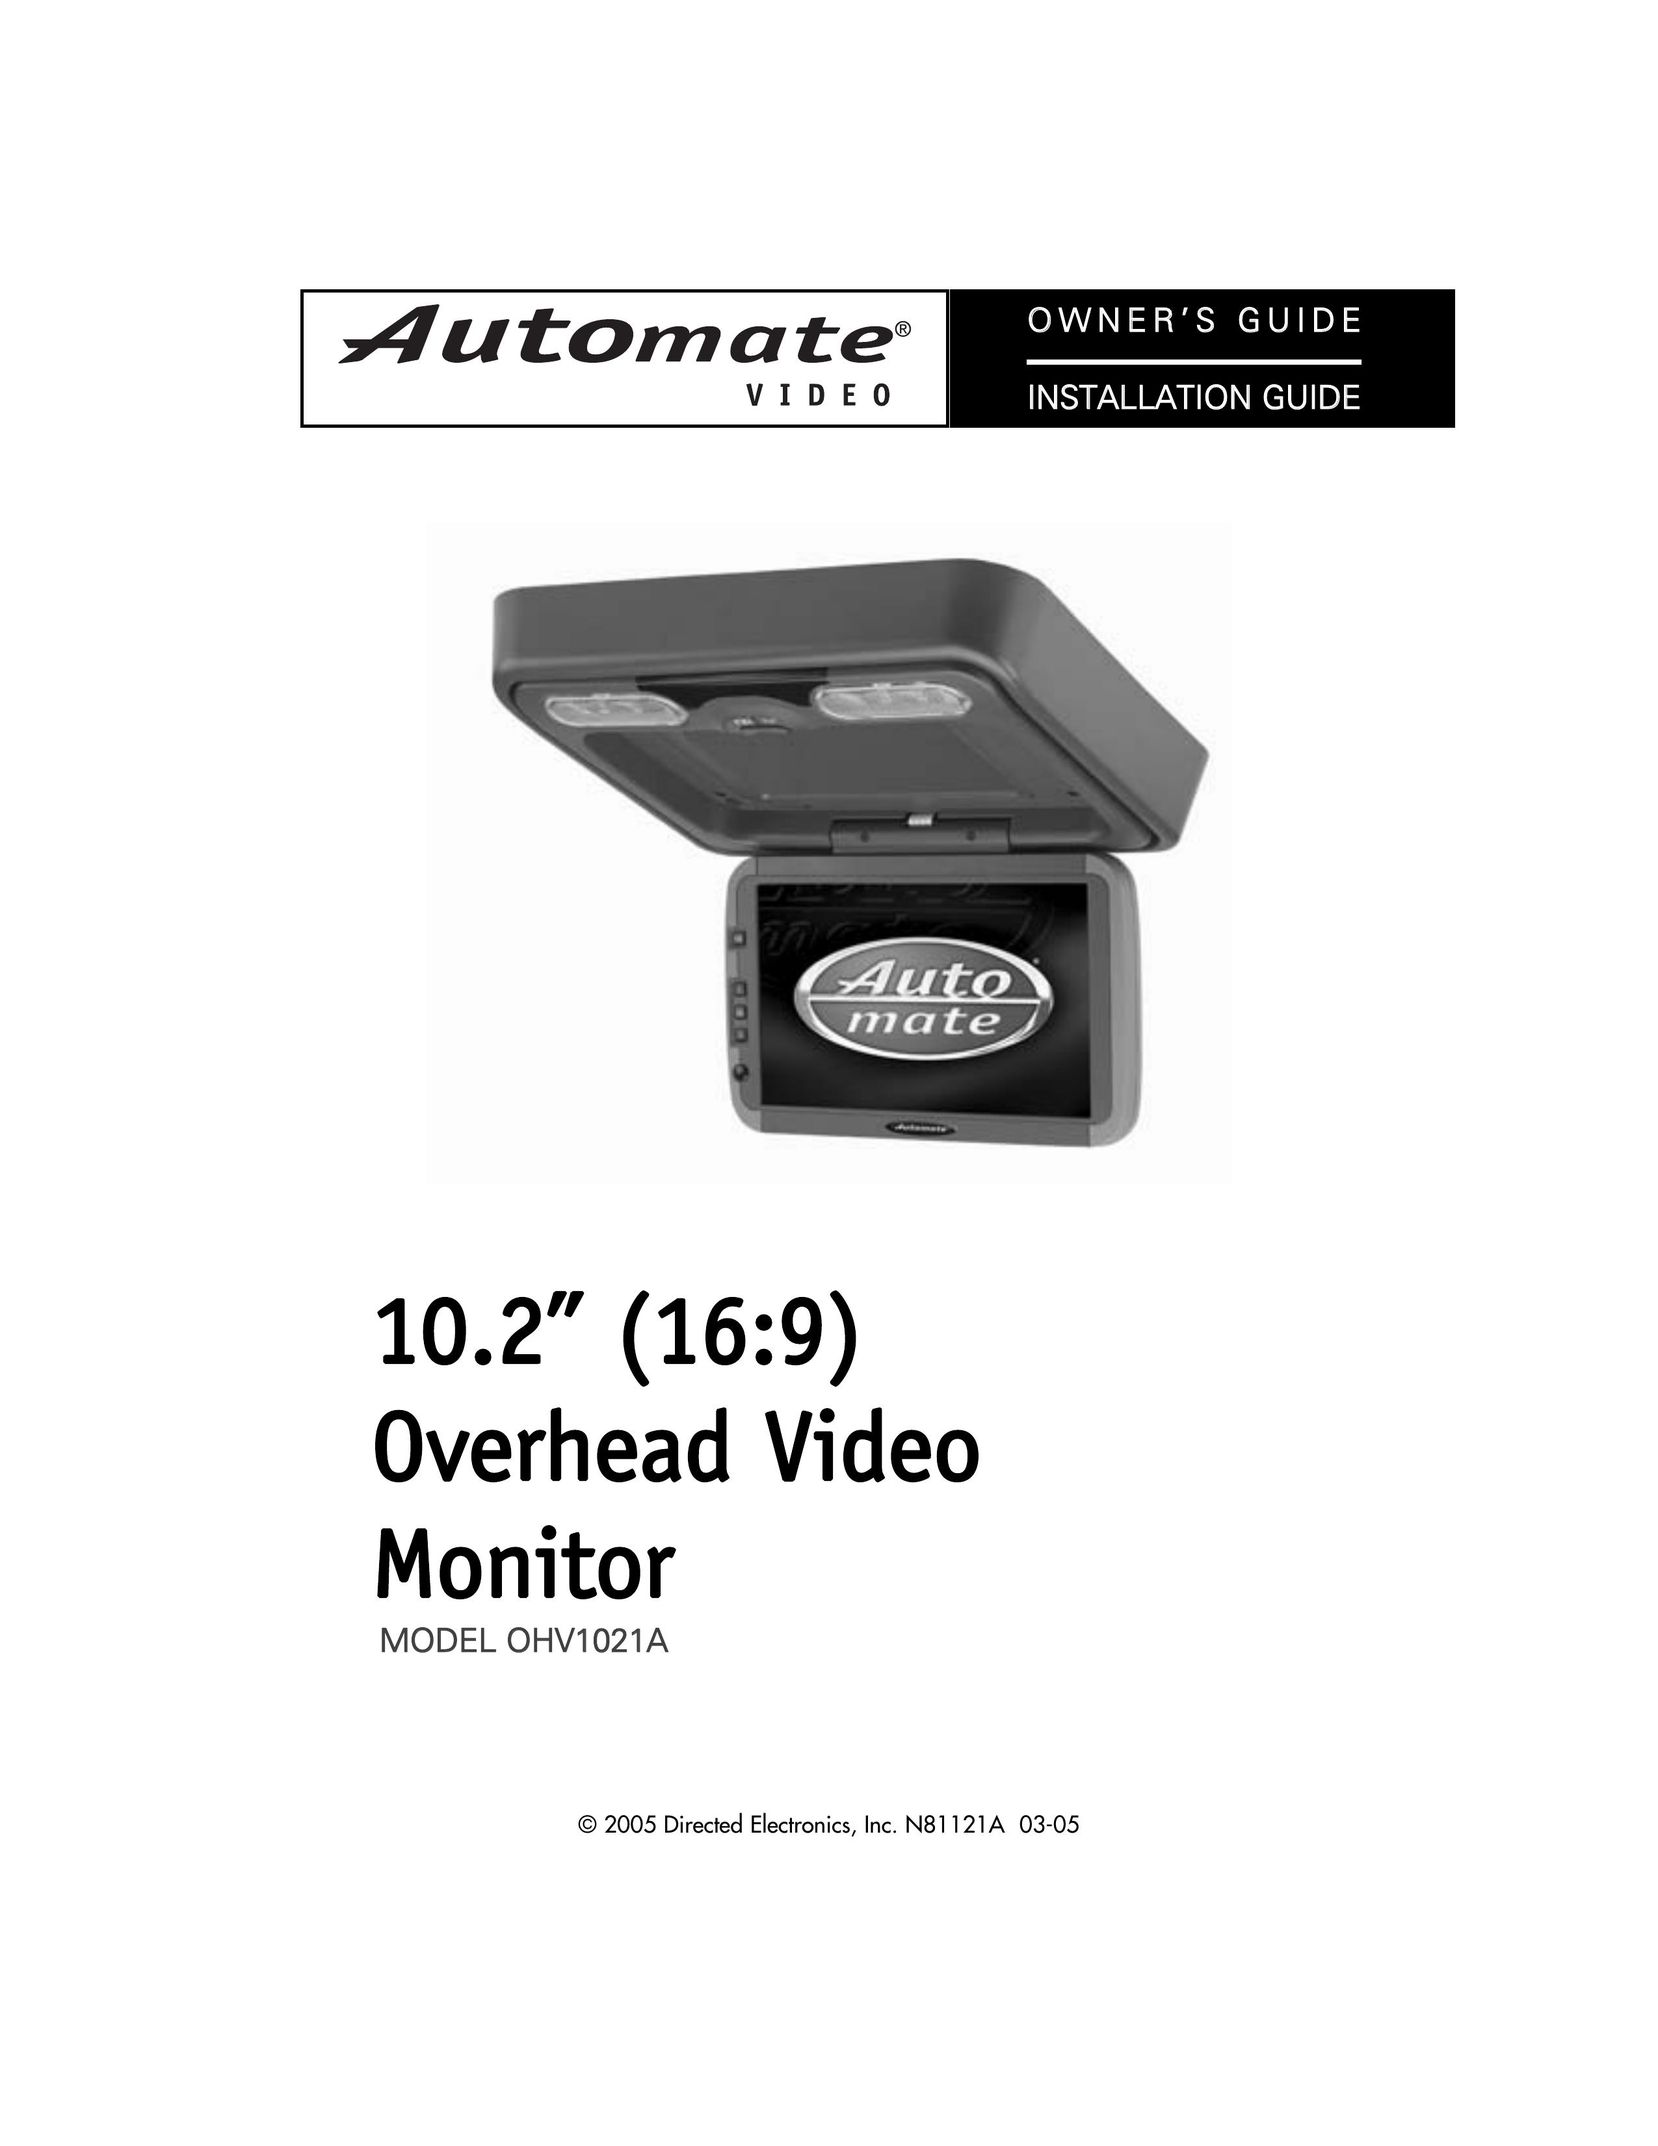 Directed Electronics OHV1021A Car Video System User Manual